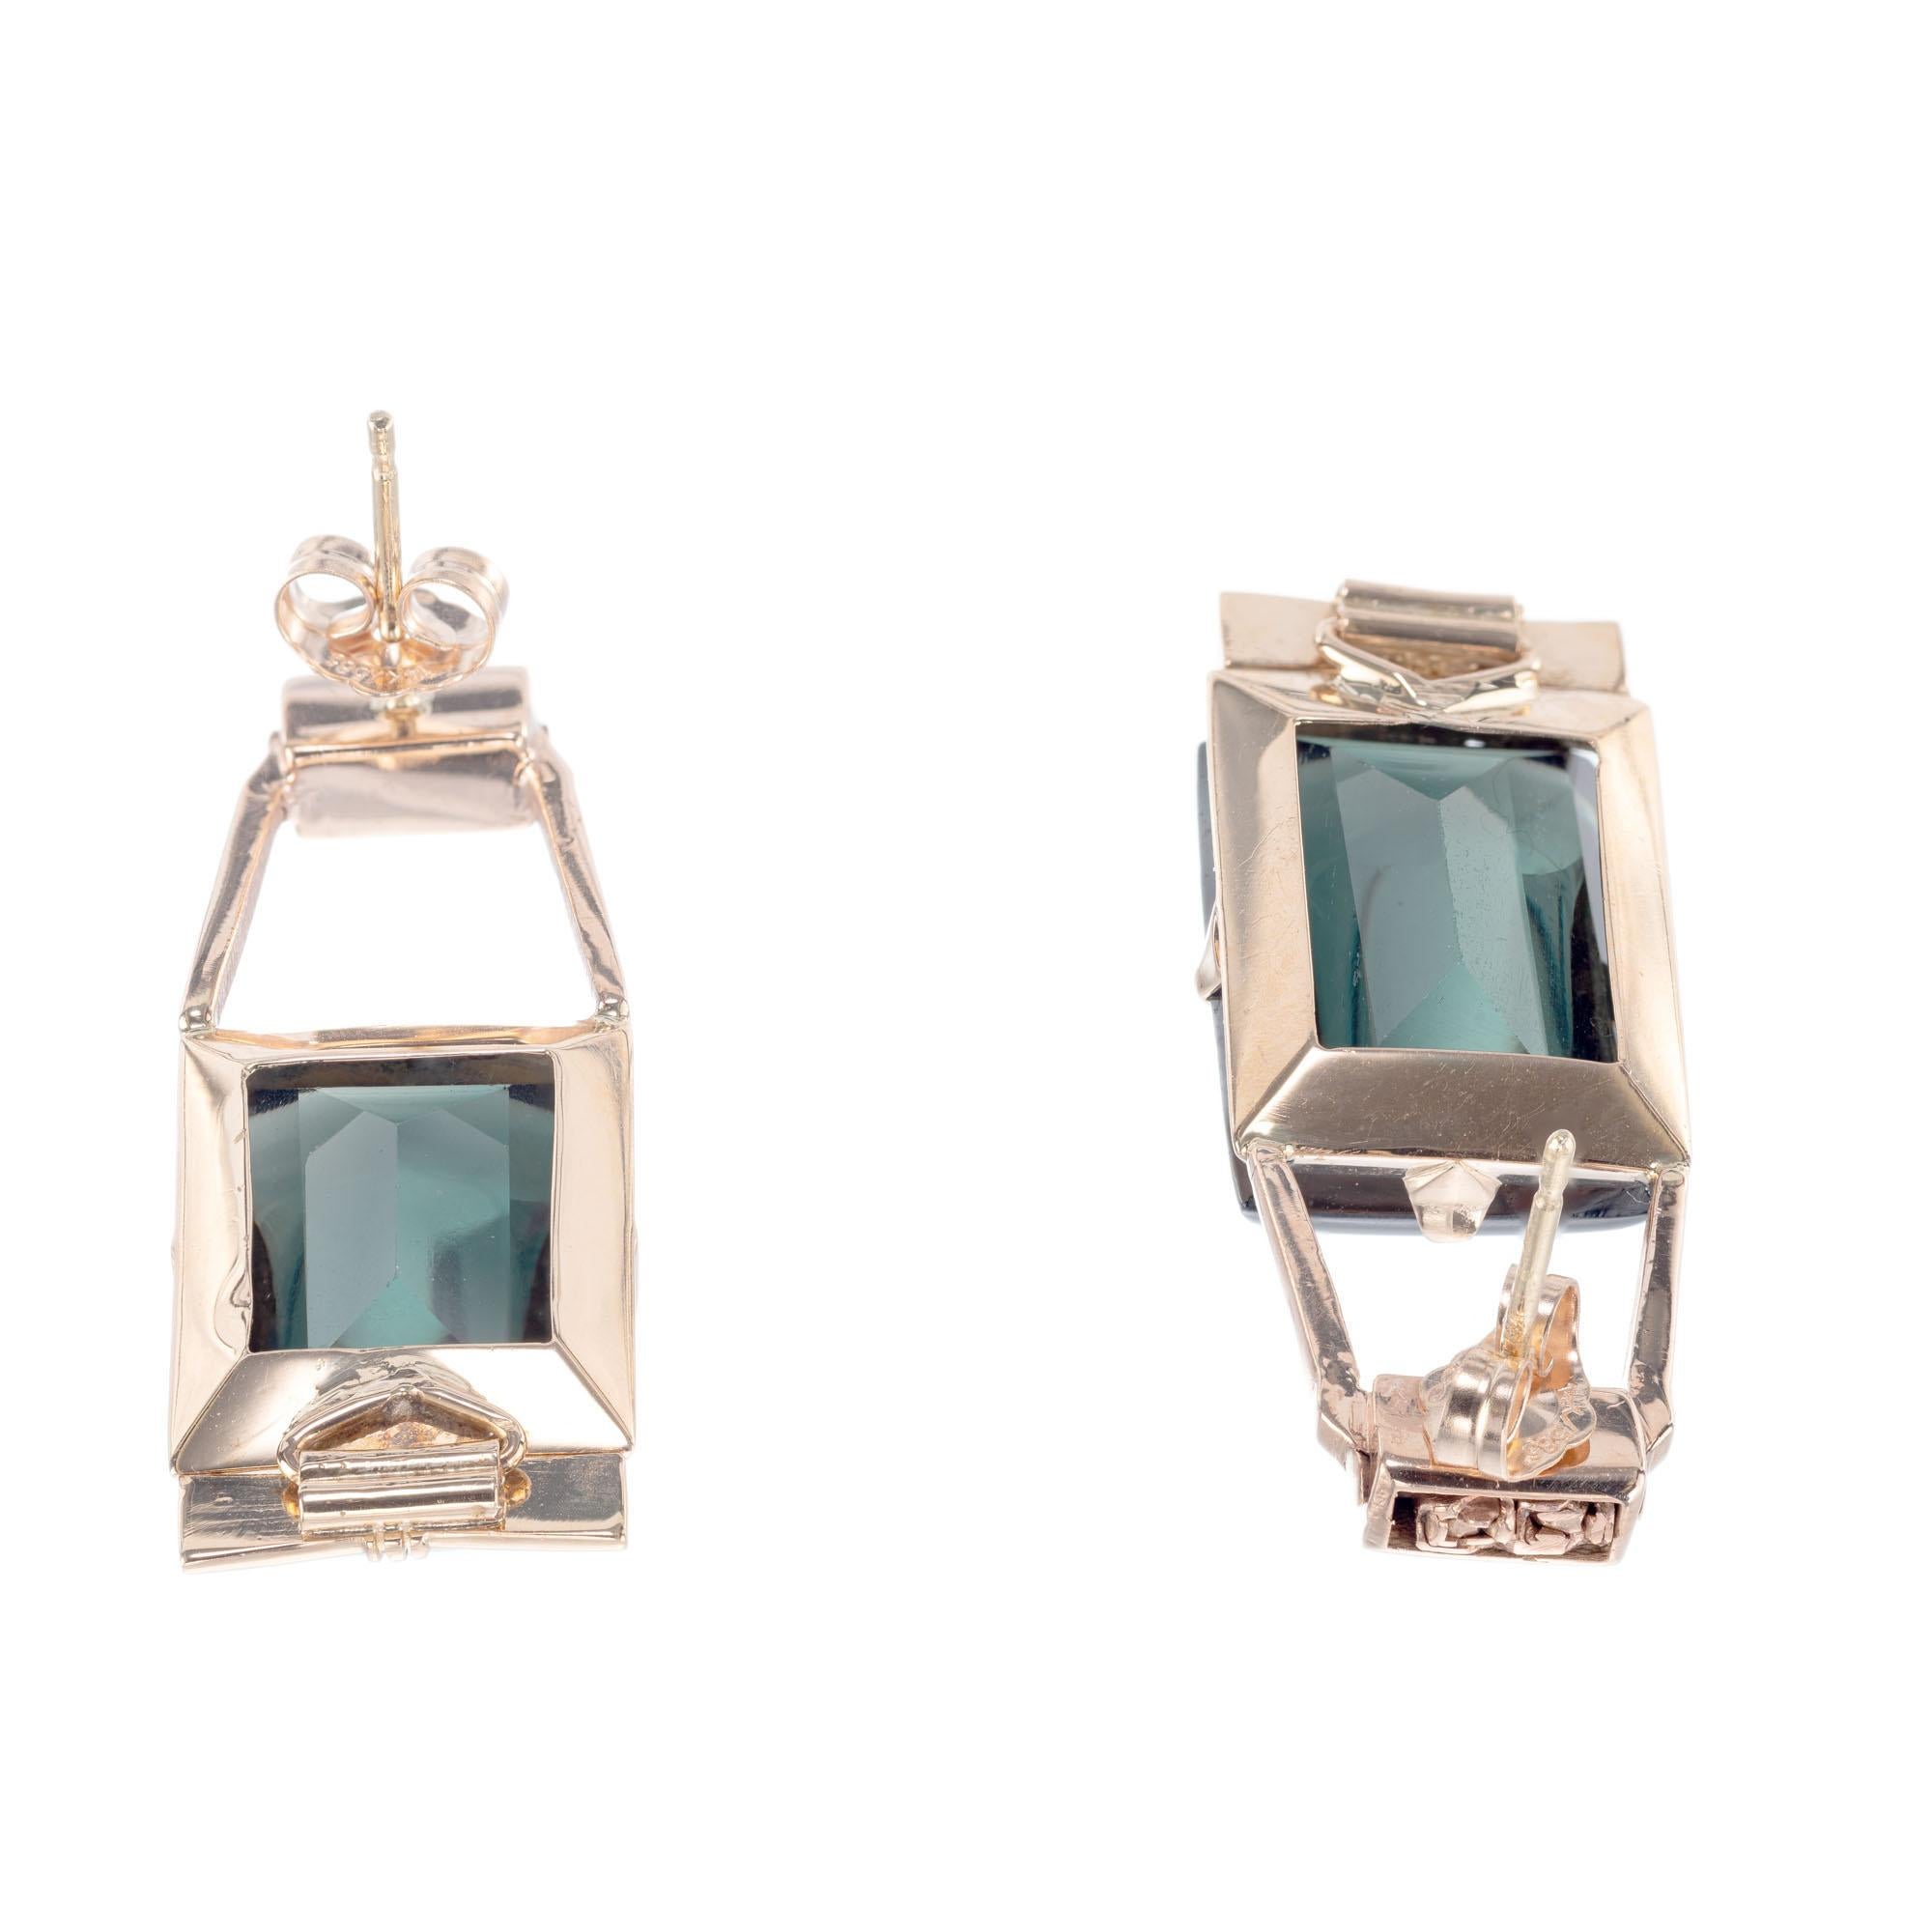 Art Deco Retro 24 Carat Emerald Cut Cabochon Green Tourmaline Dangle Earrings In Good Condition For Sale In Stamford, CT